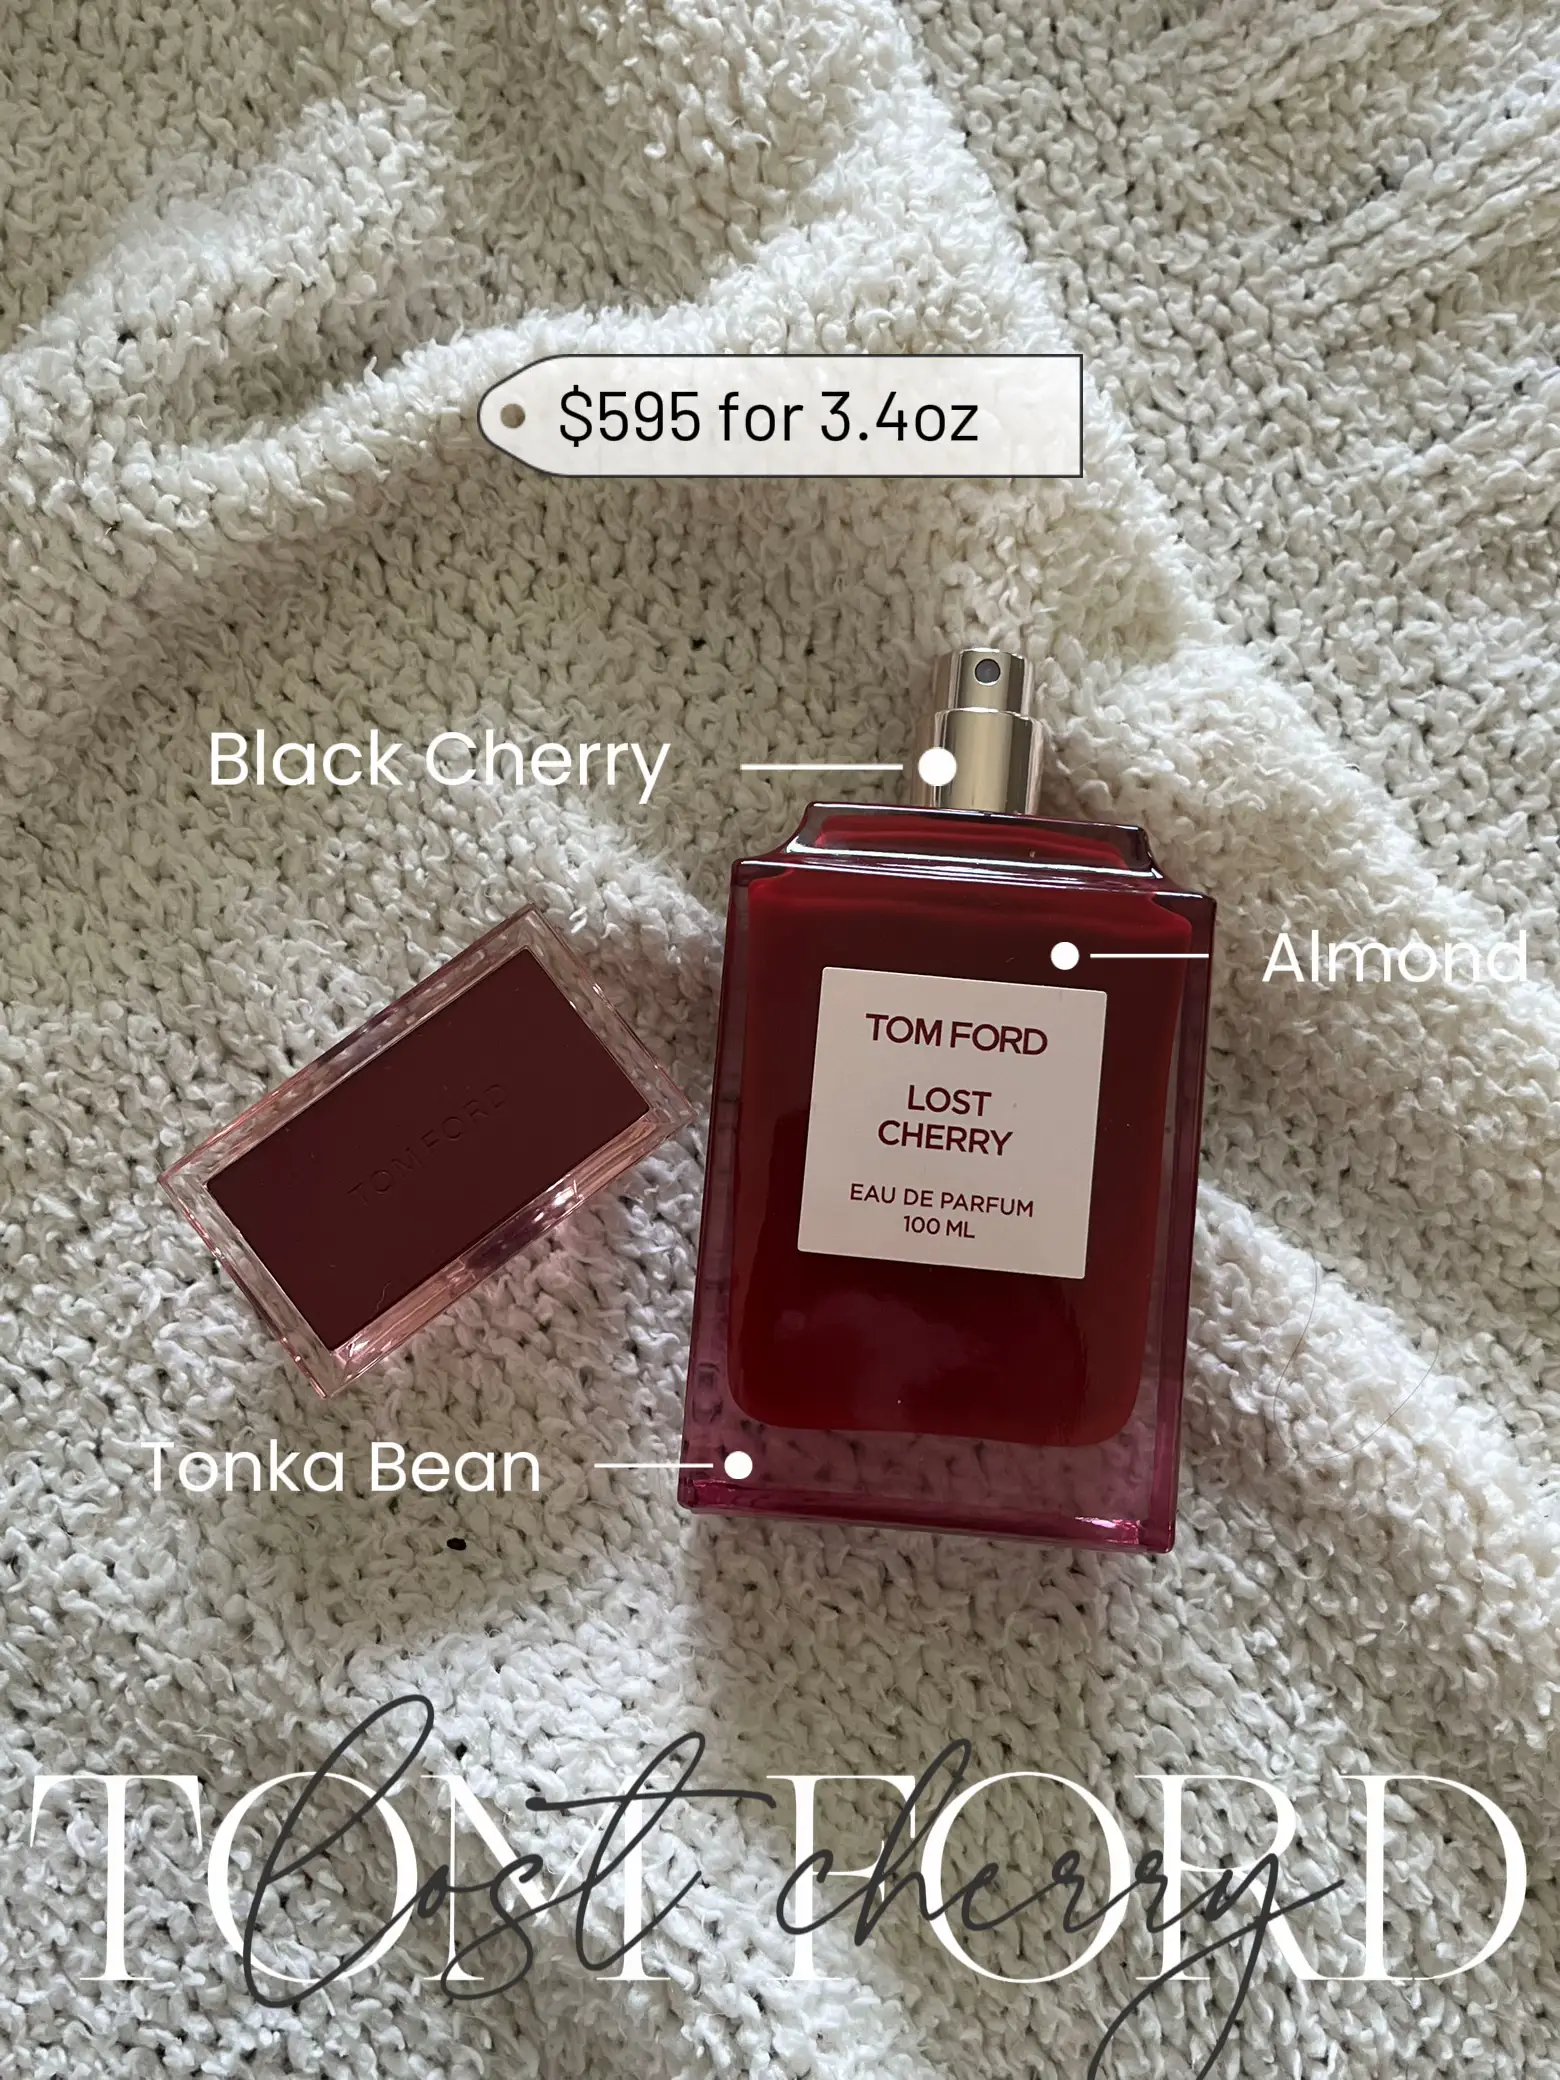 7 INCREDIBLE Lost Cherry Tom Ford Dupe Perfumes